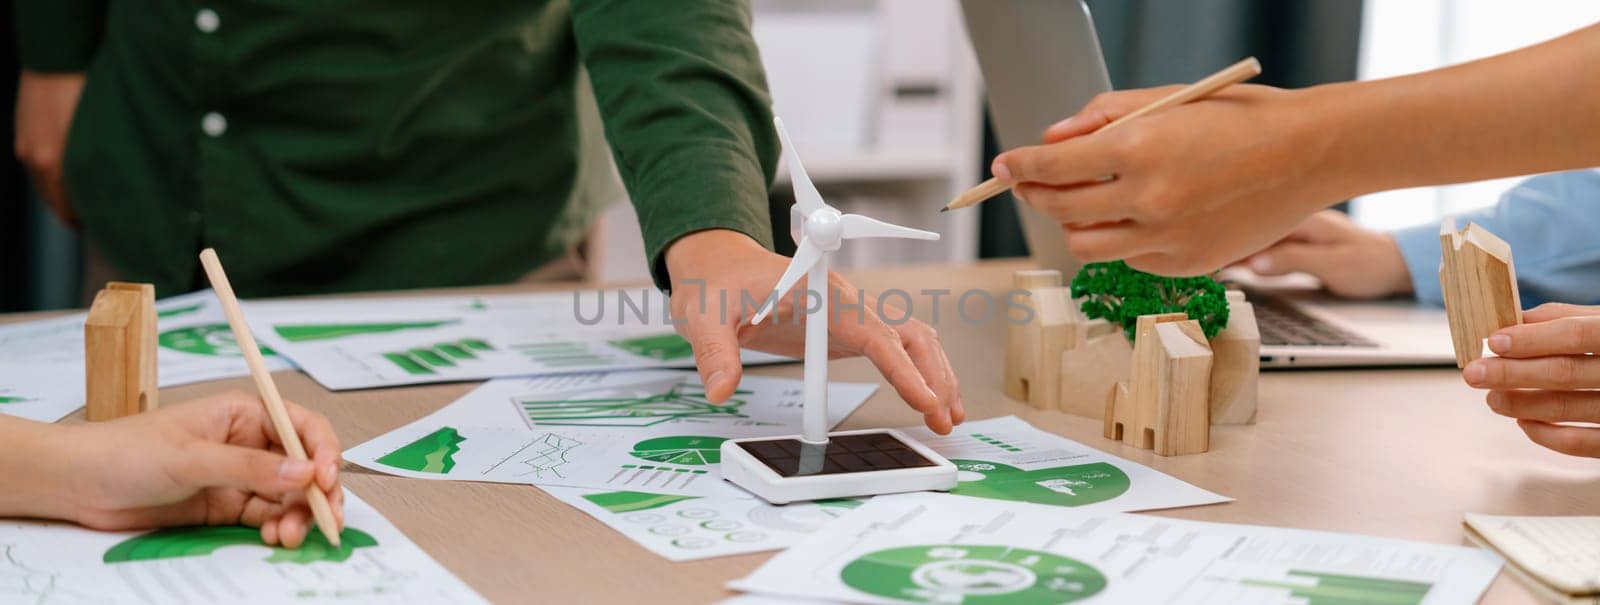 Windmill model placed on green business meeting table. Front view. Delineation. by biancoblue